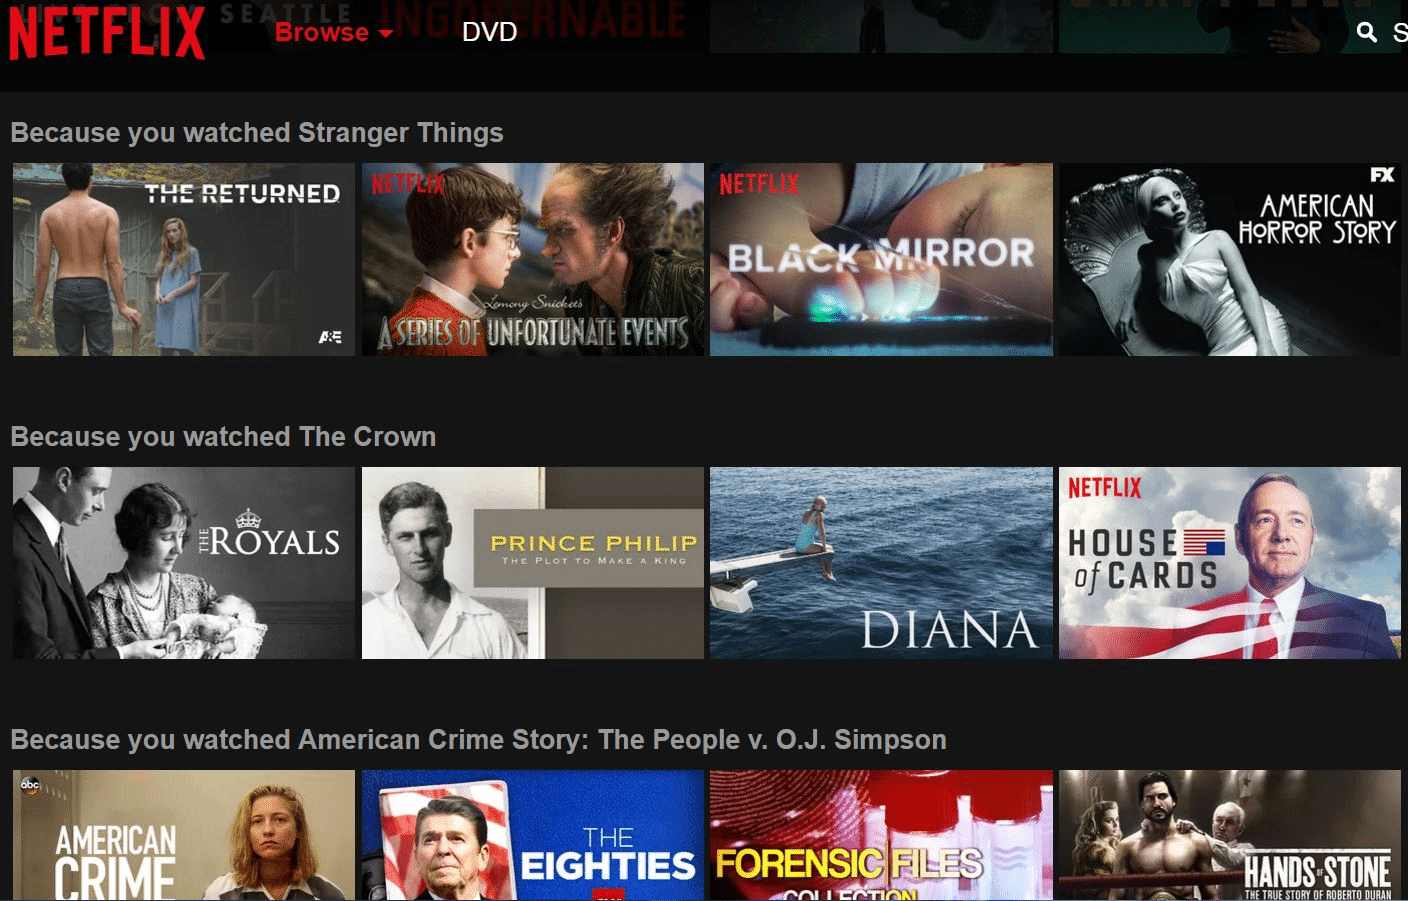 Netflix’s algorithm does an incredible job of using the data of what people watch to deliver even more content they will enjoy